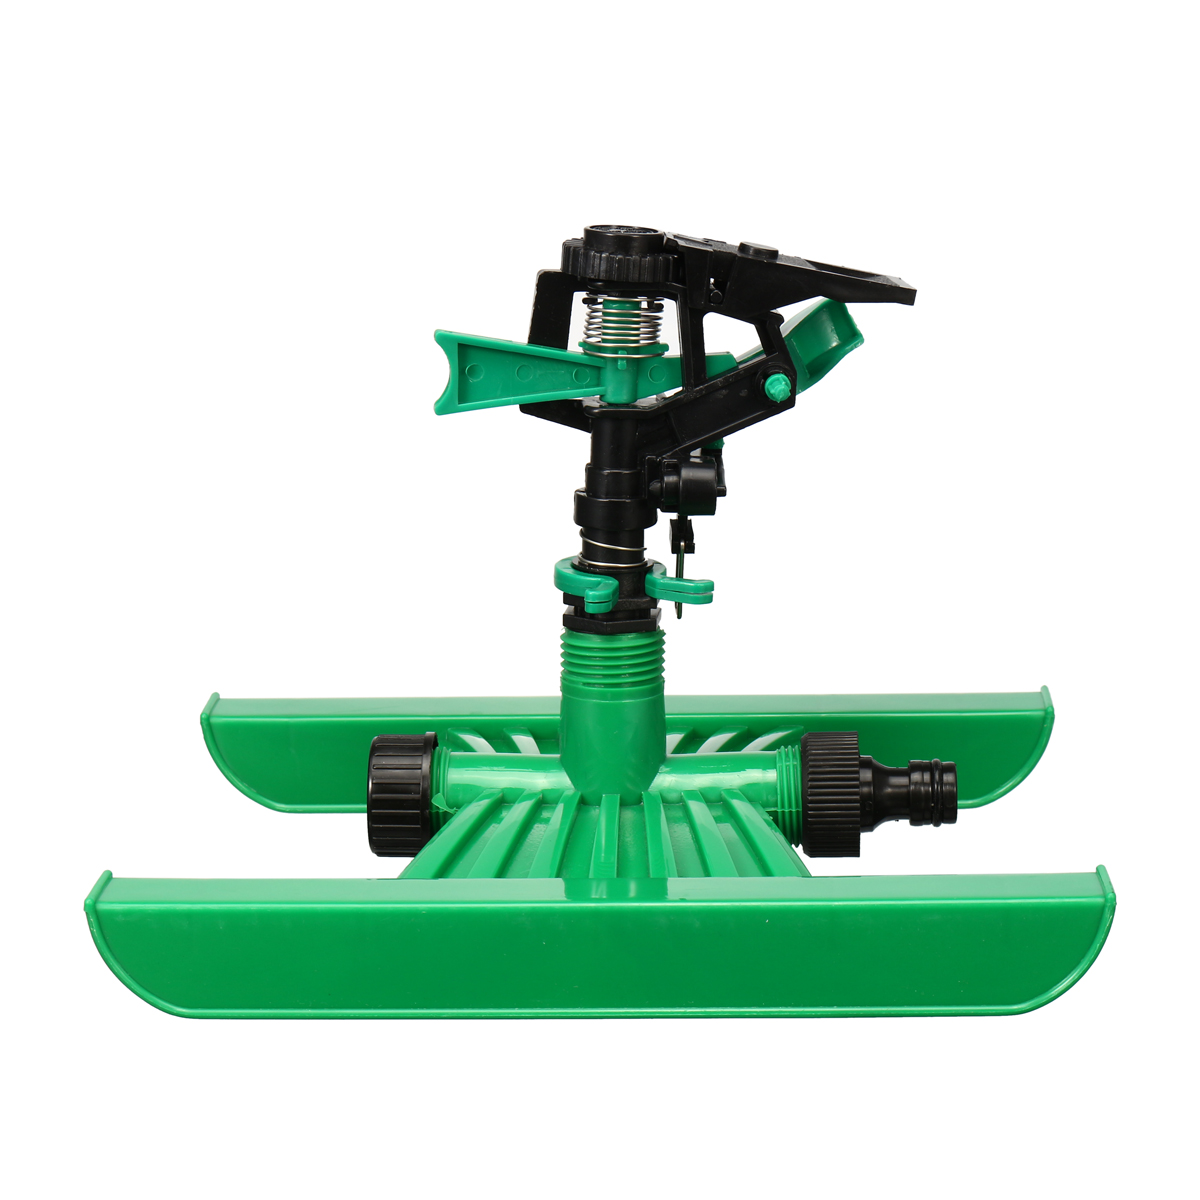 H-Base-Plastic-Auto-Rotating-Lawn-Sprinkler-Garden-Lawn-Plant-Grass-Watering-Tool-1558817-5